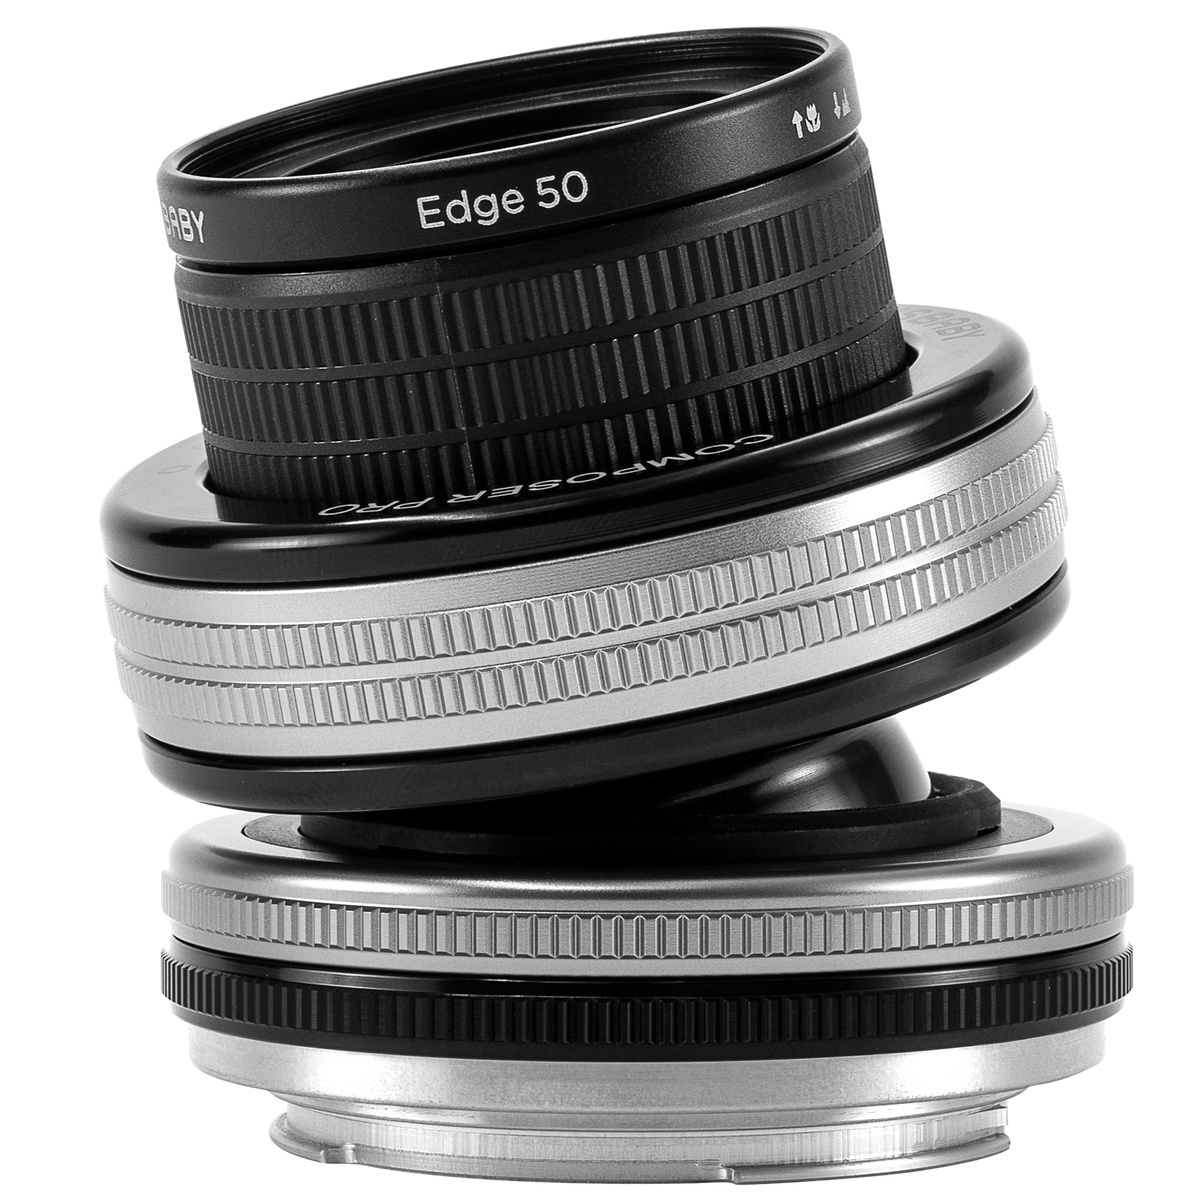 Composer Pro II With Edge 50 Optic | Camera Lens | Lensbaby